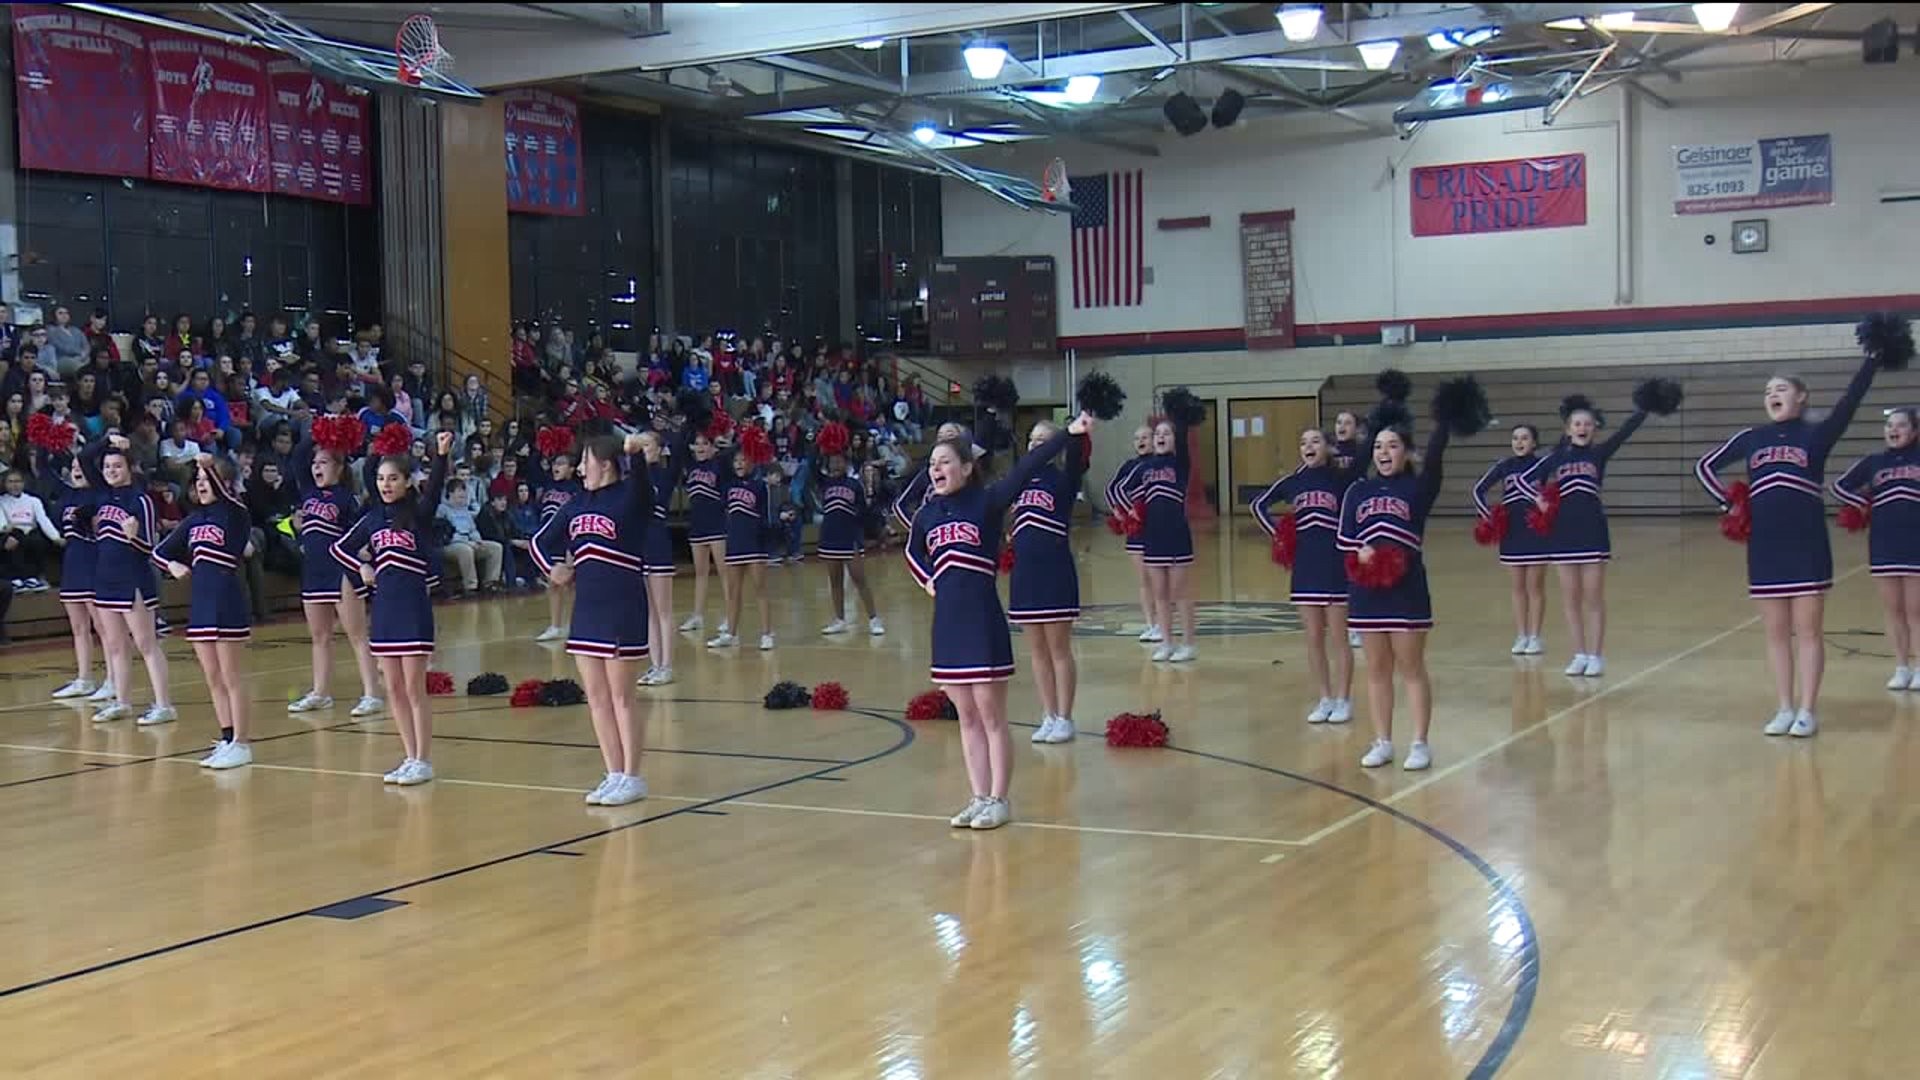 One Last Cheer at Coughlin High School